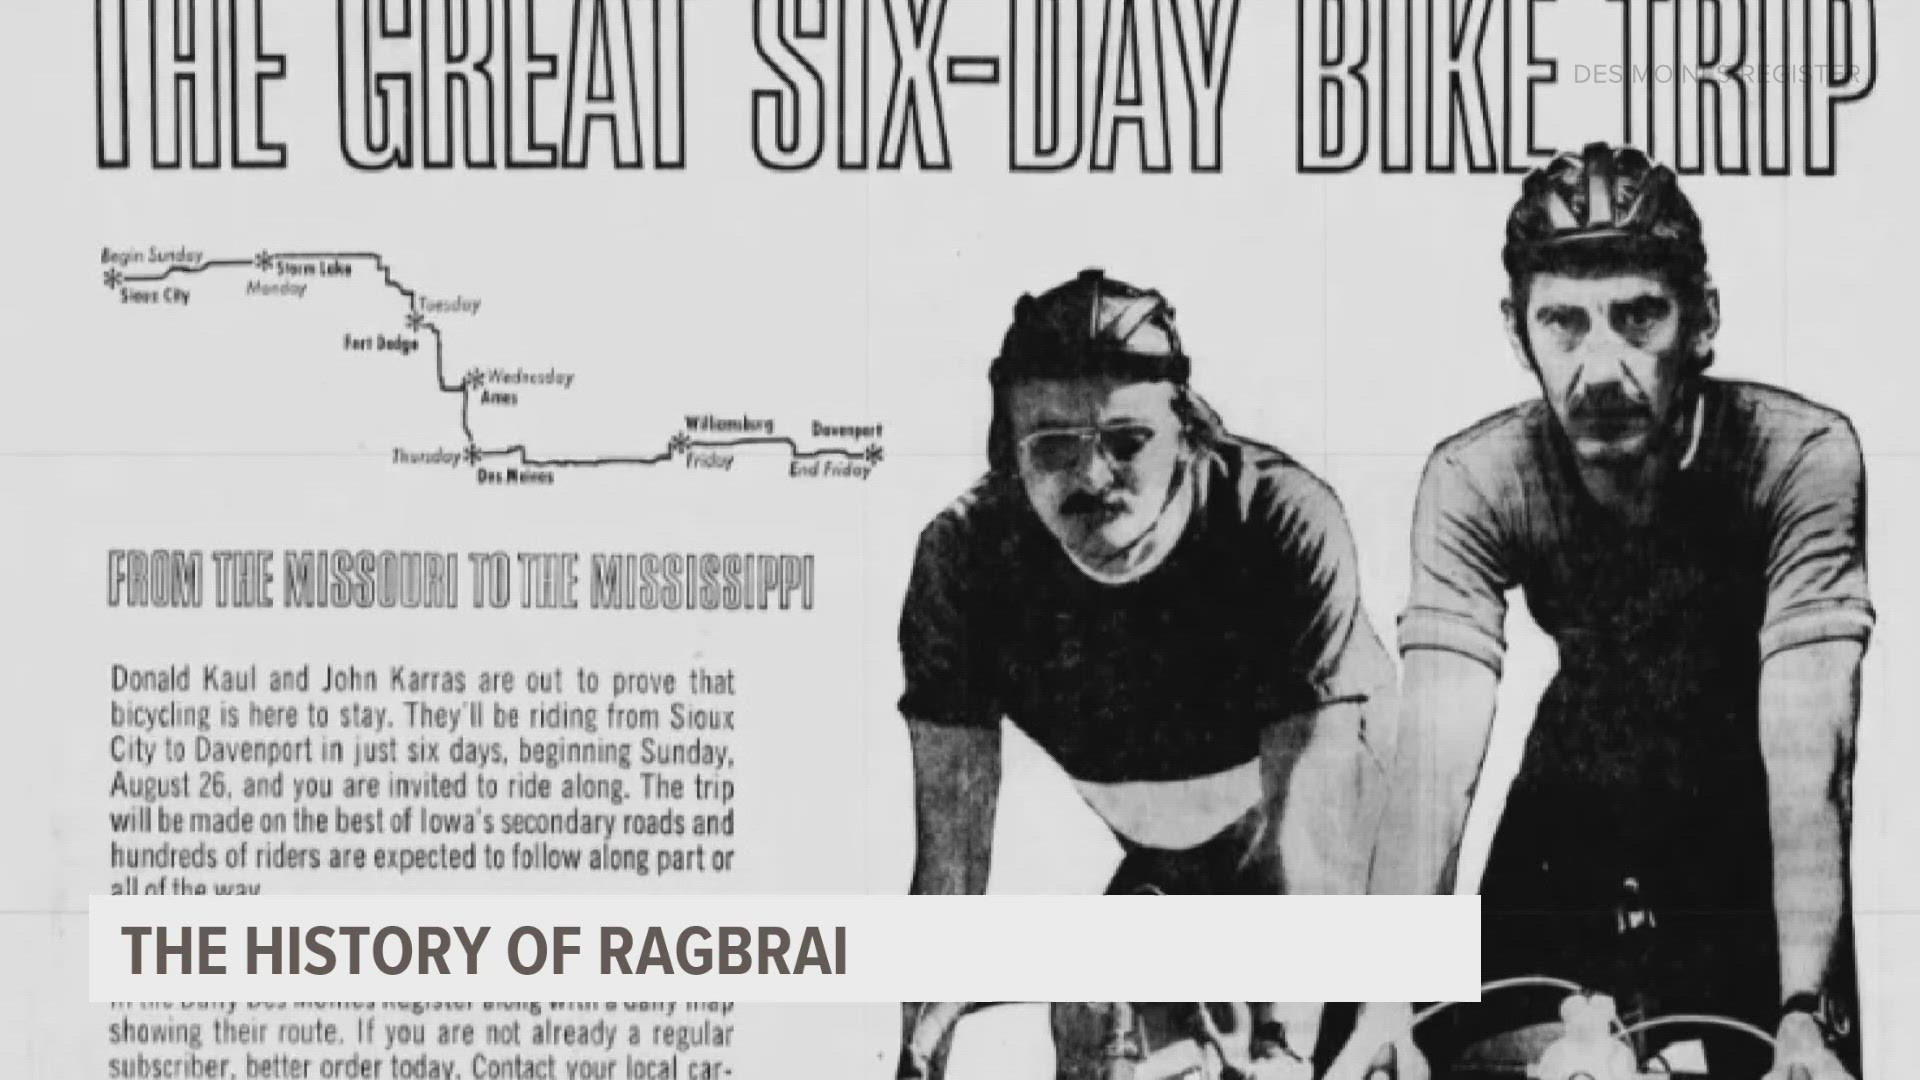 Five decades after its invention by two Des Moines Register columnists, RAGBRAI is the longest, largest and oldest recreational bicycle touring event in the world.